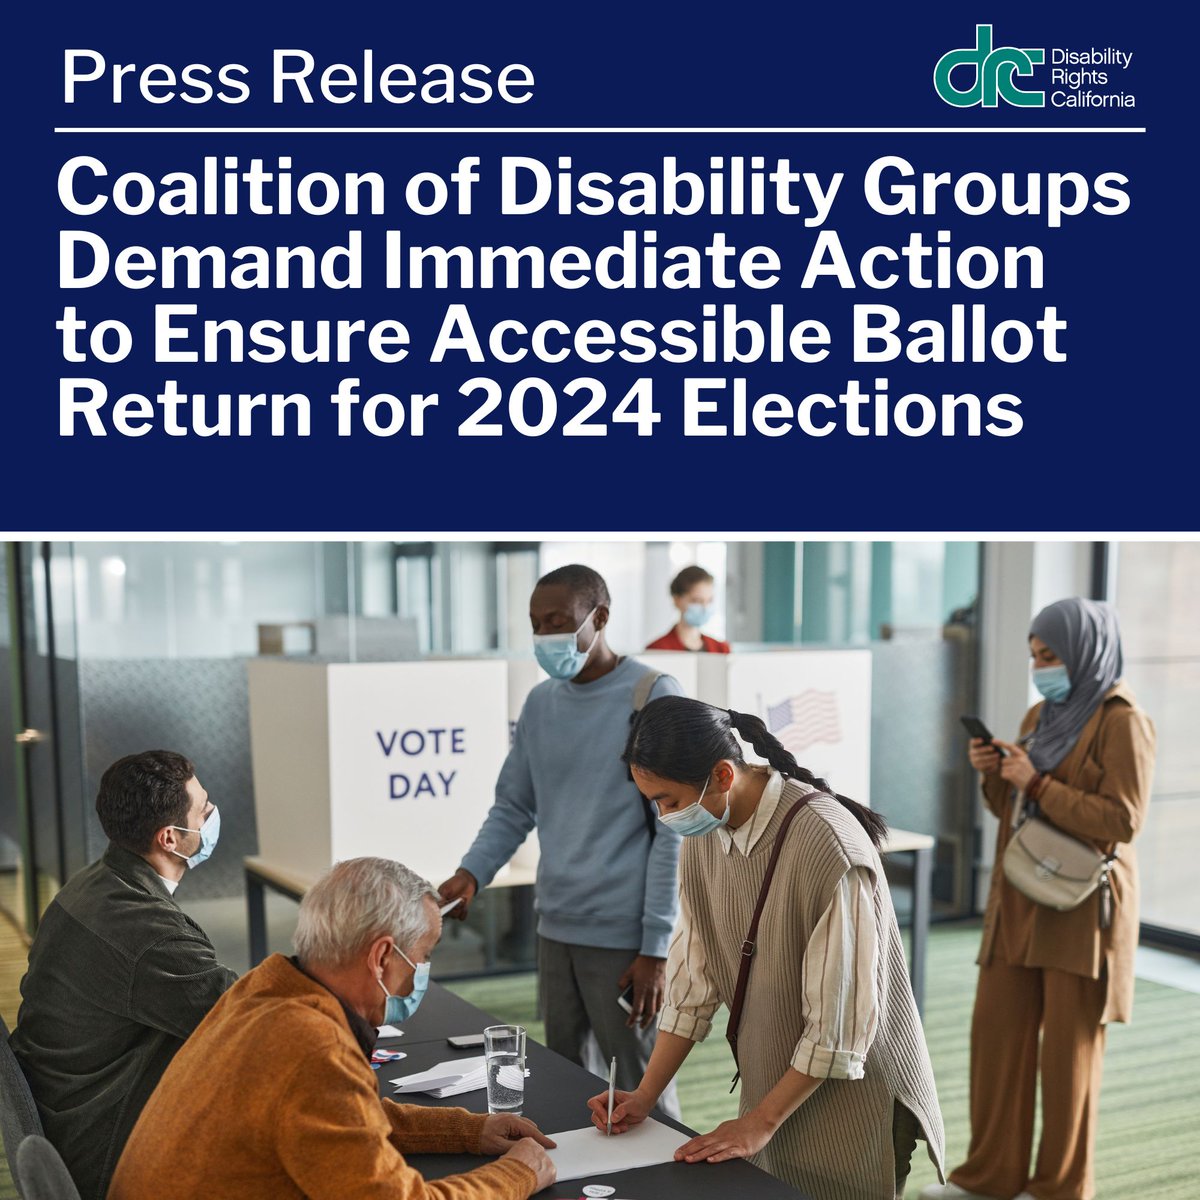 Today, a coalition of disability rights groups filed a motion for a preliminary injunction requiring the California Secretary of State (SOS) to implement accessible electronic mechanisms for voters with print disabilities to return their vote-by-mail ballots privately and